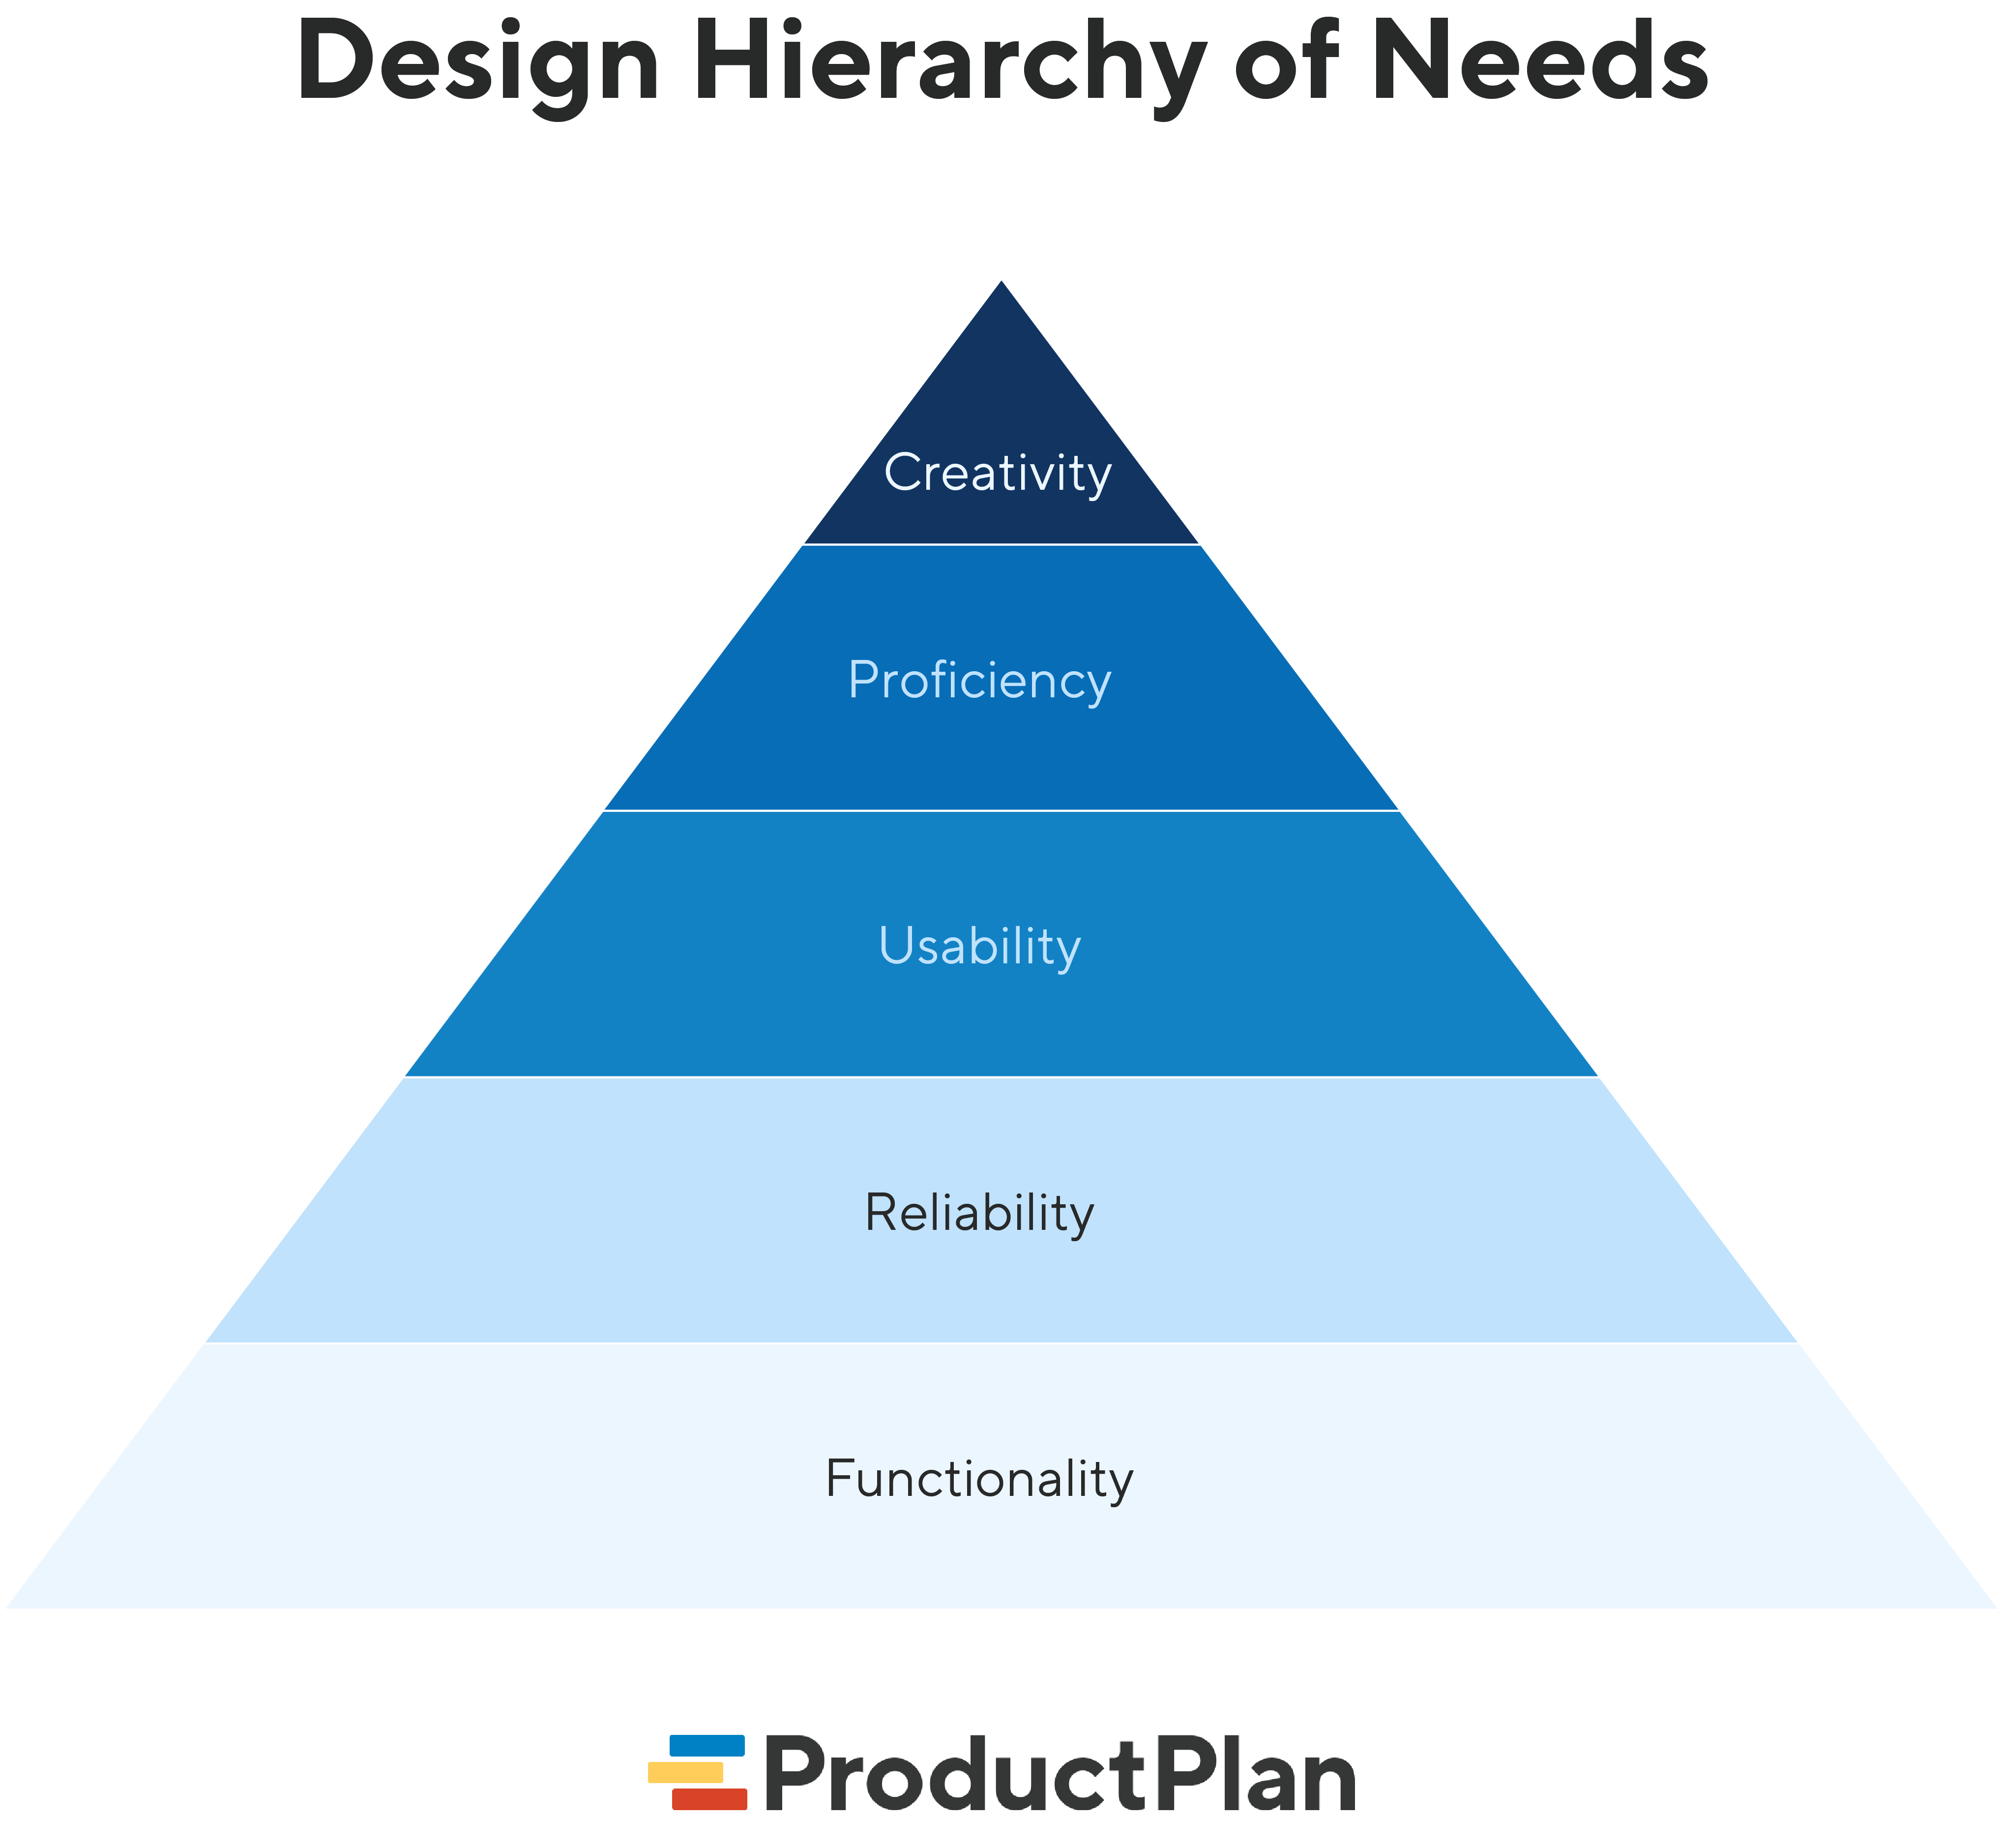 6 Rules Of Product Design According To Maslows Hierarchy Of Needs 2023